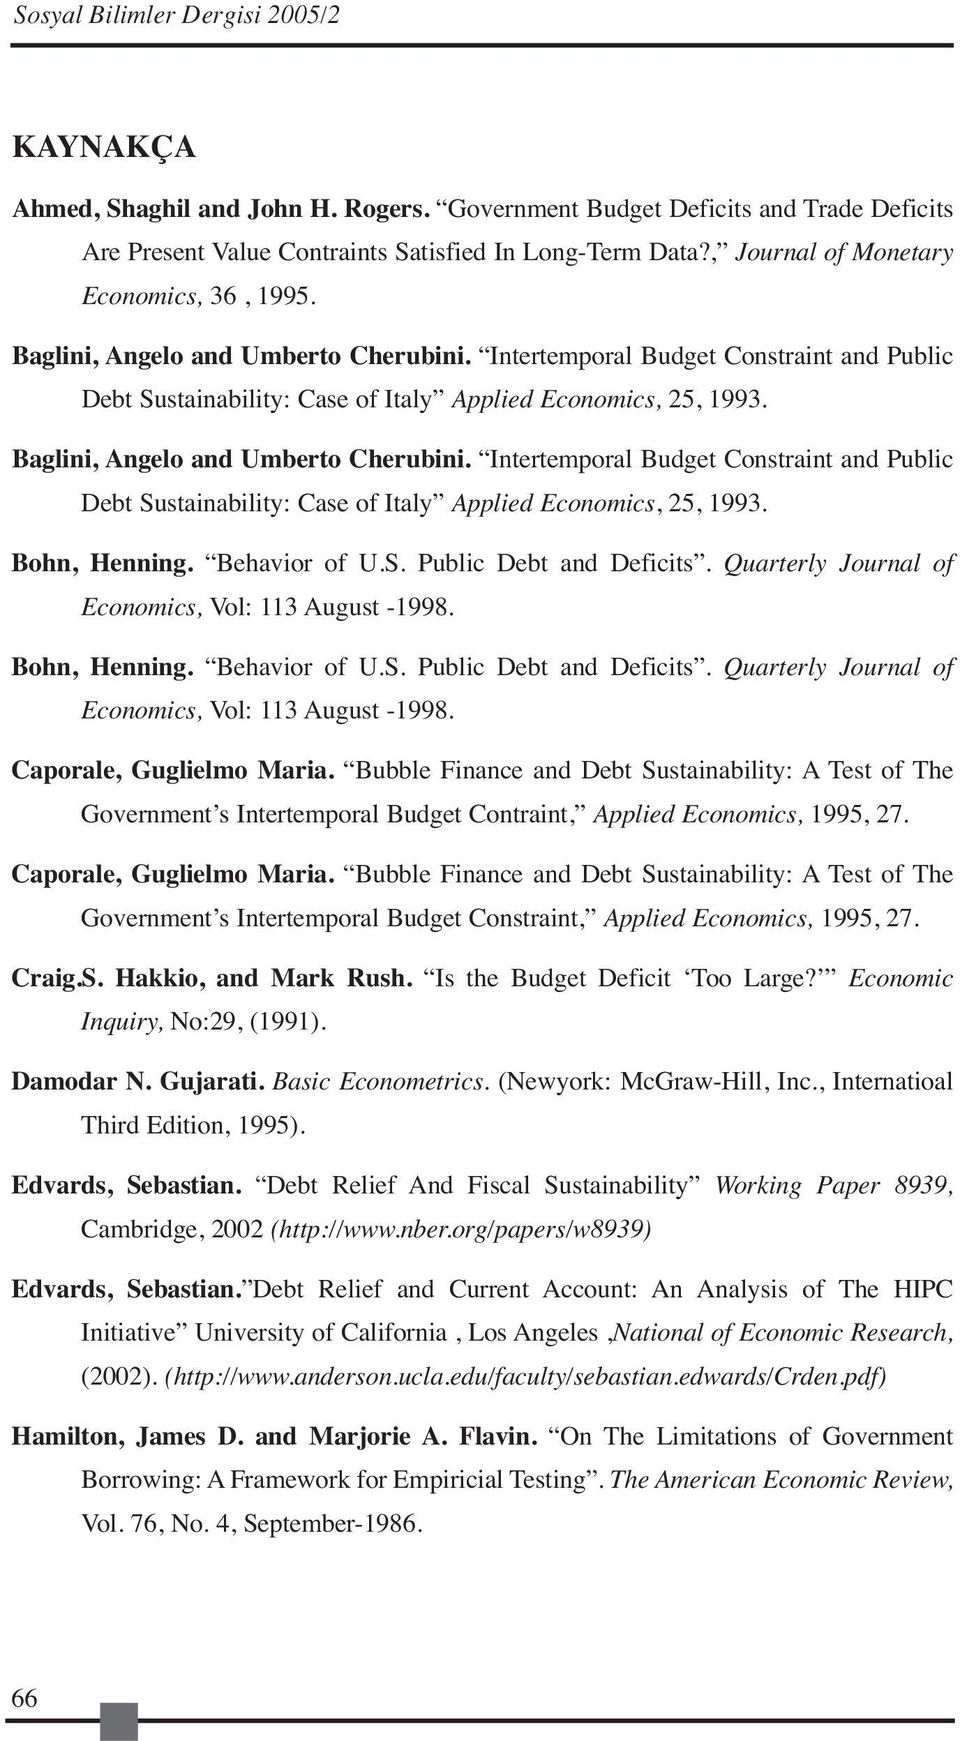 Baglini, Angelo and Umberto Cherubini. Intertemporal Budget Constraint and Public Debt Sustainability: Case of Italy Applied Economics, 25, 1993. Bohn, Henning. Behavior of U.S. Public Debt and Deficits.